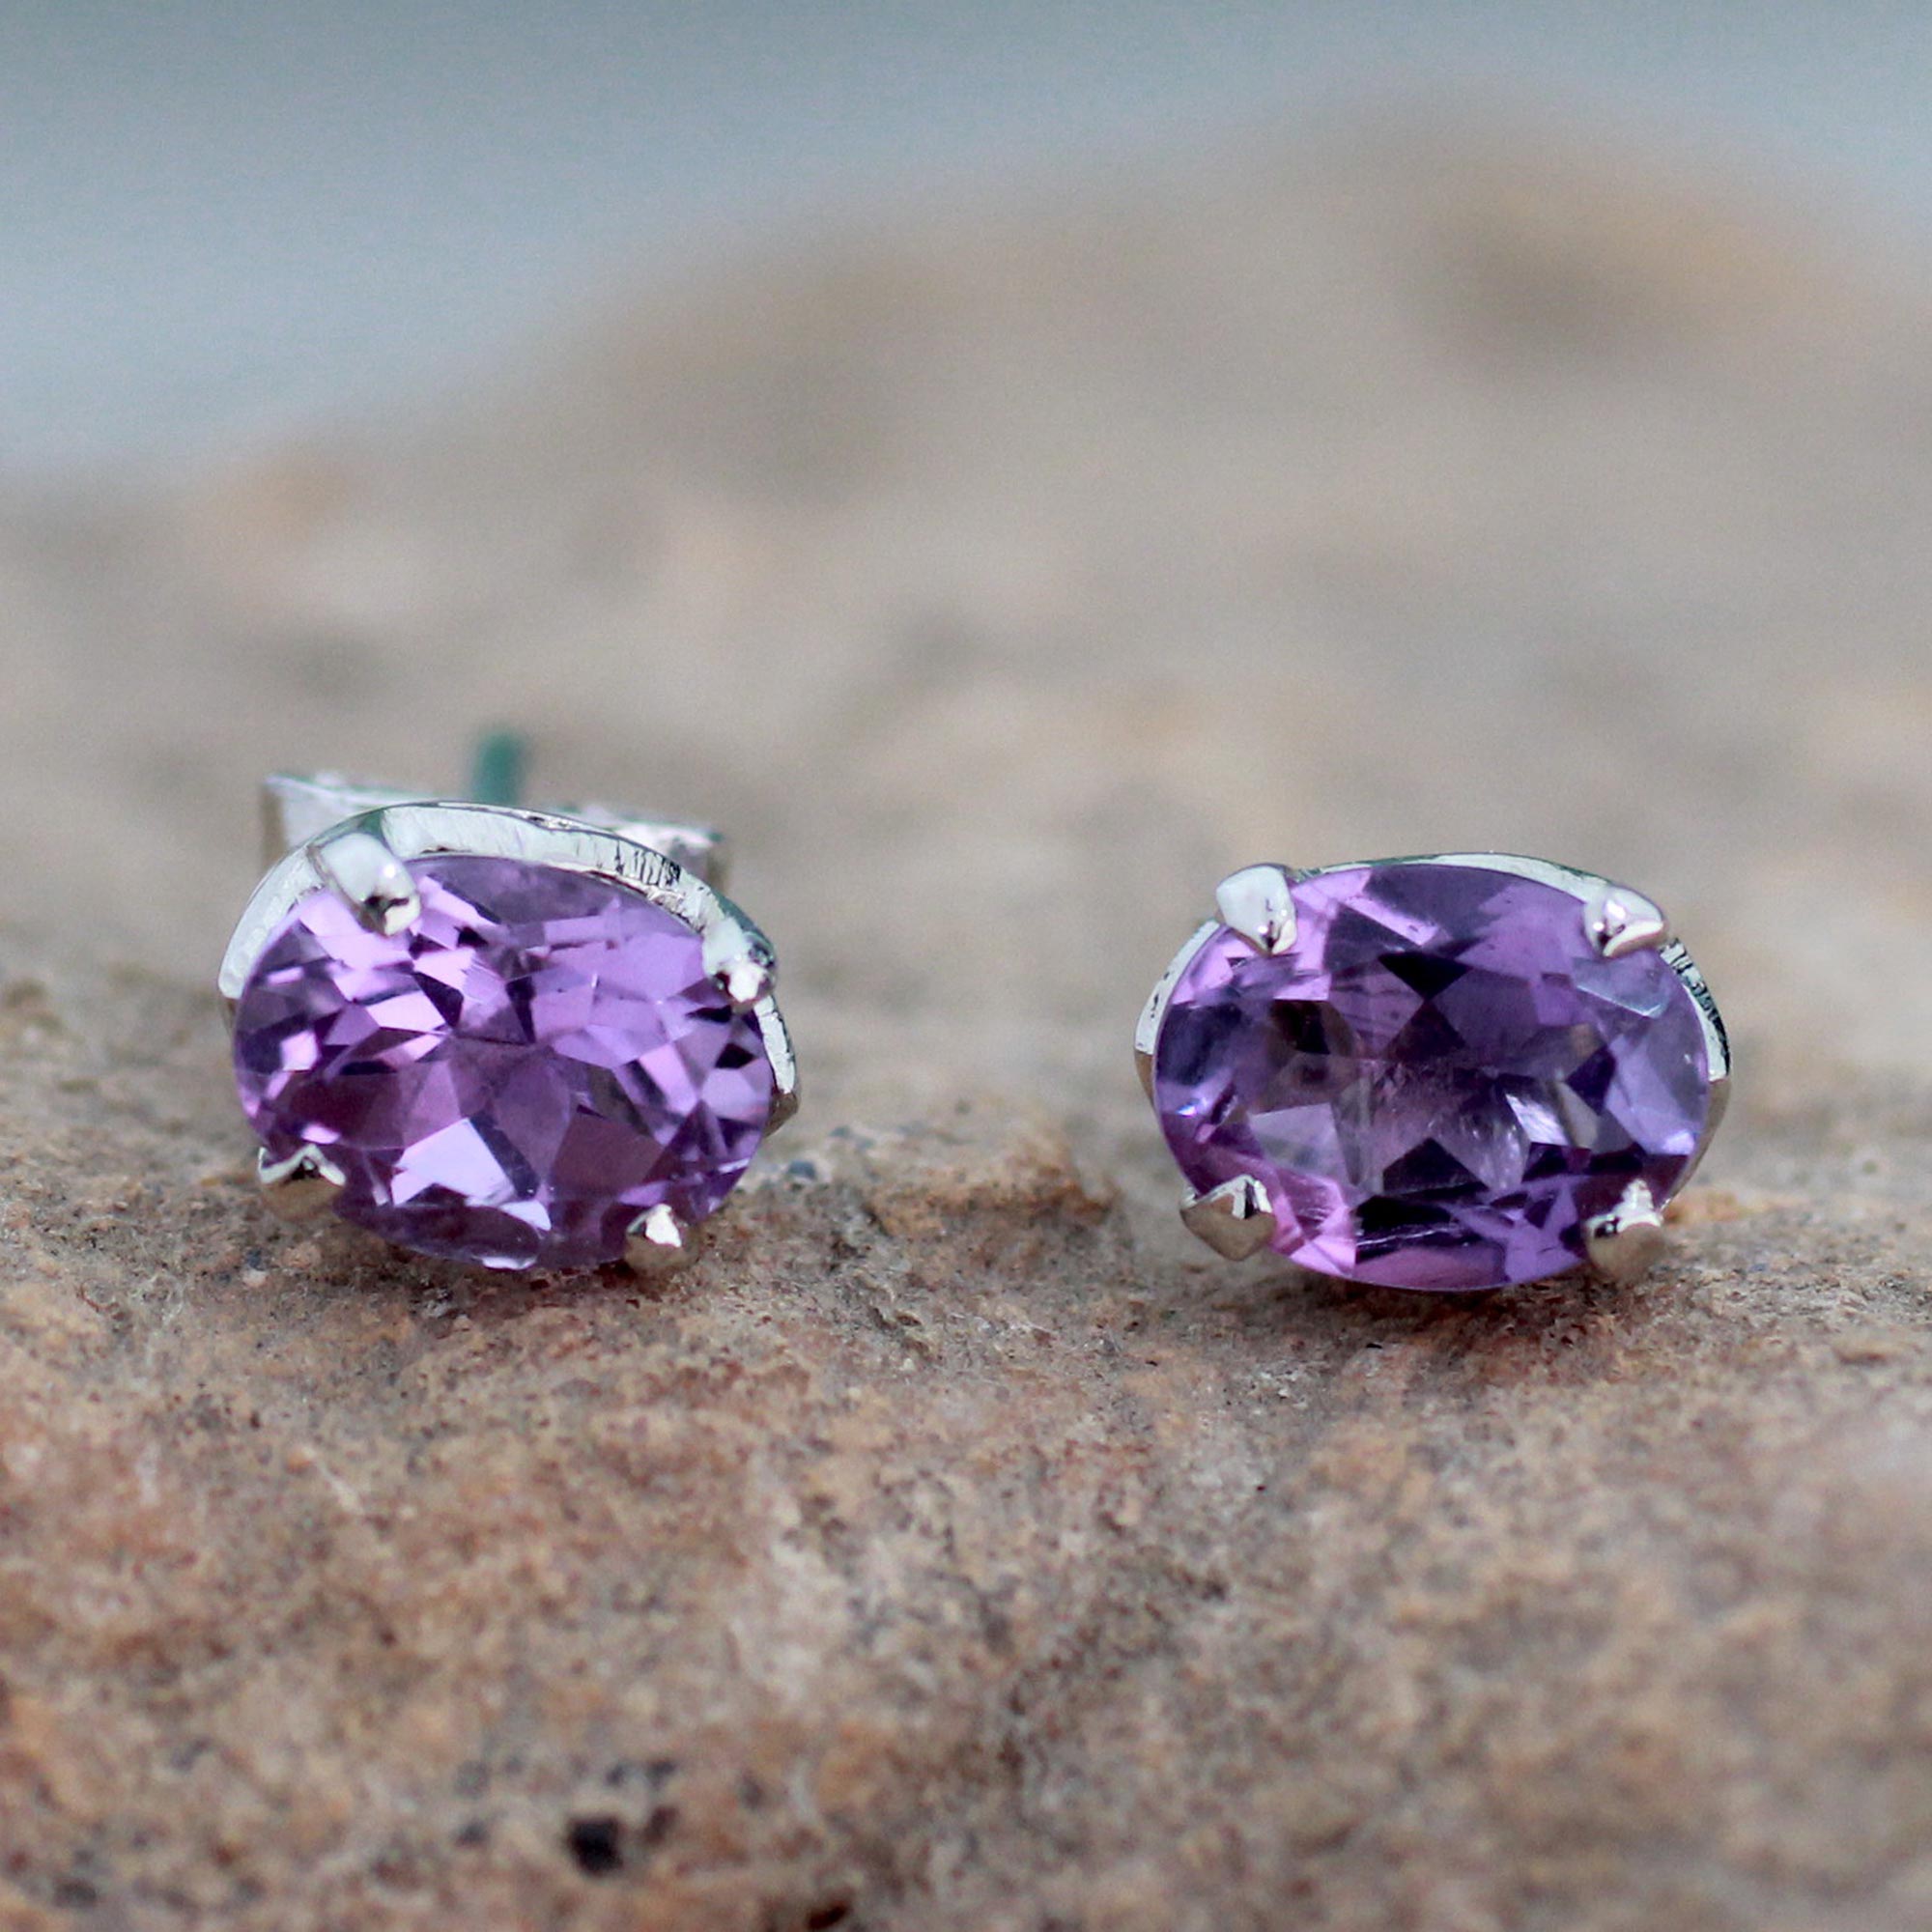 2 Carat Amethyst Stud Earrings from India, 'Scintillate' Gemstone to Complement Skin Tone